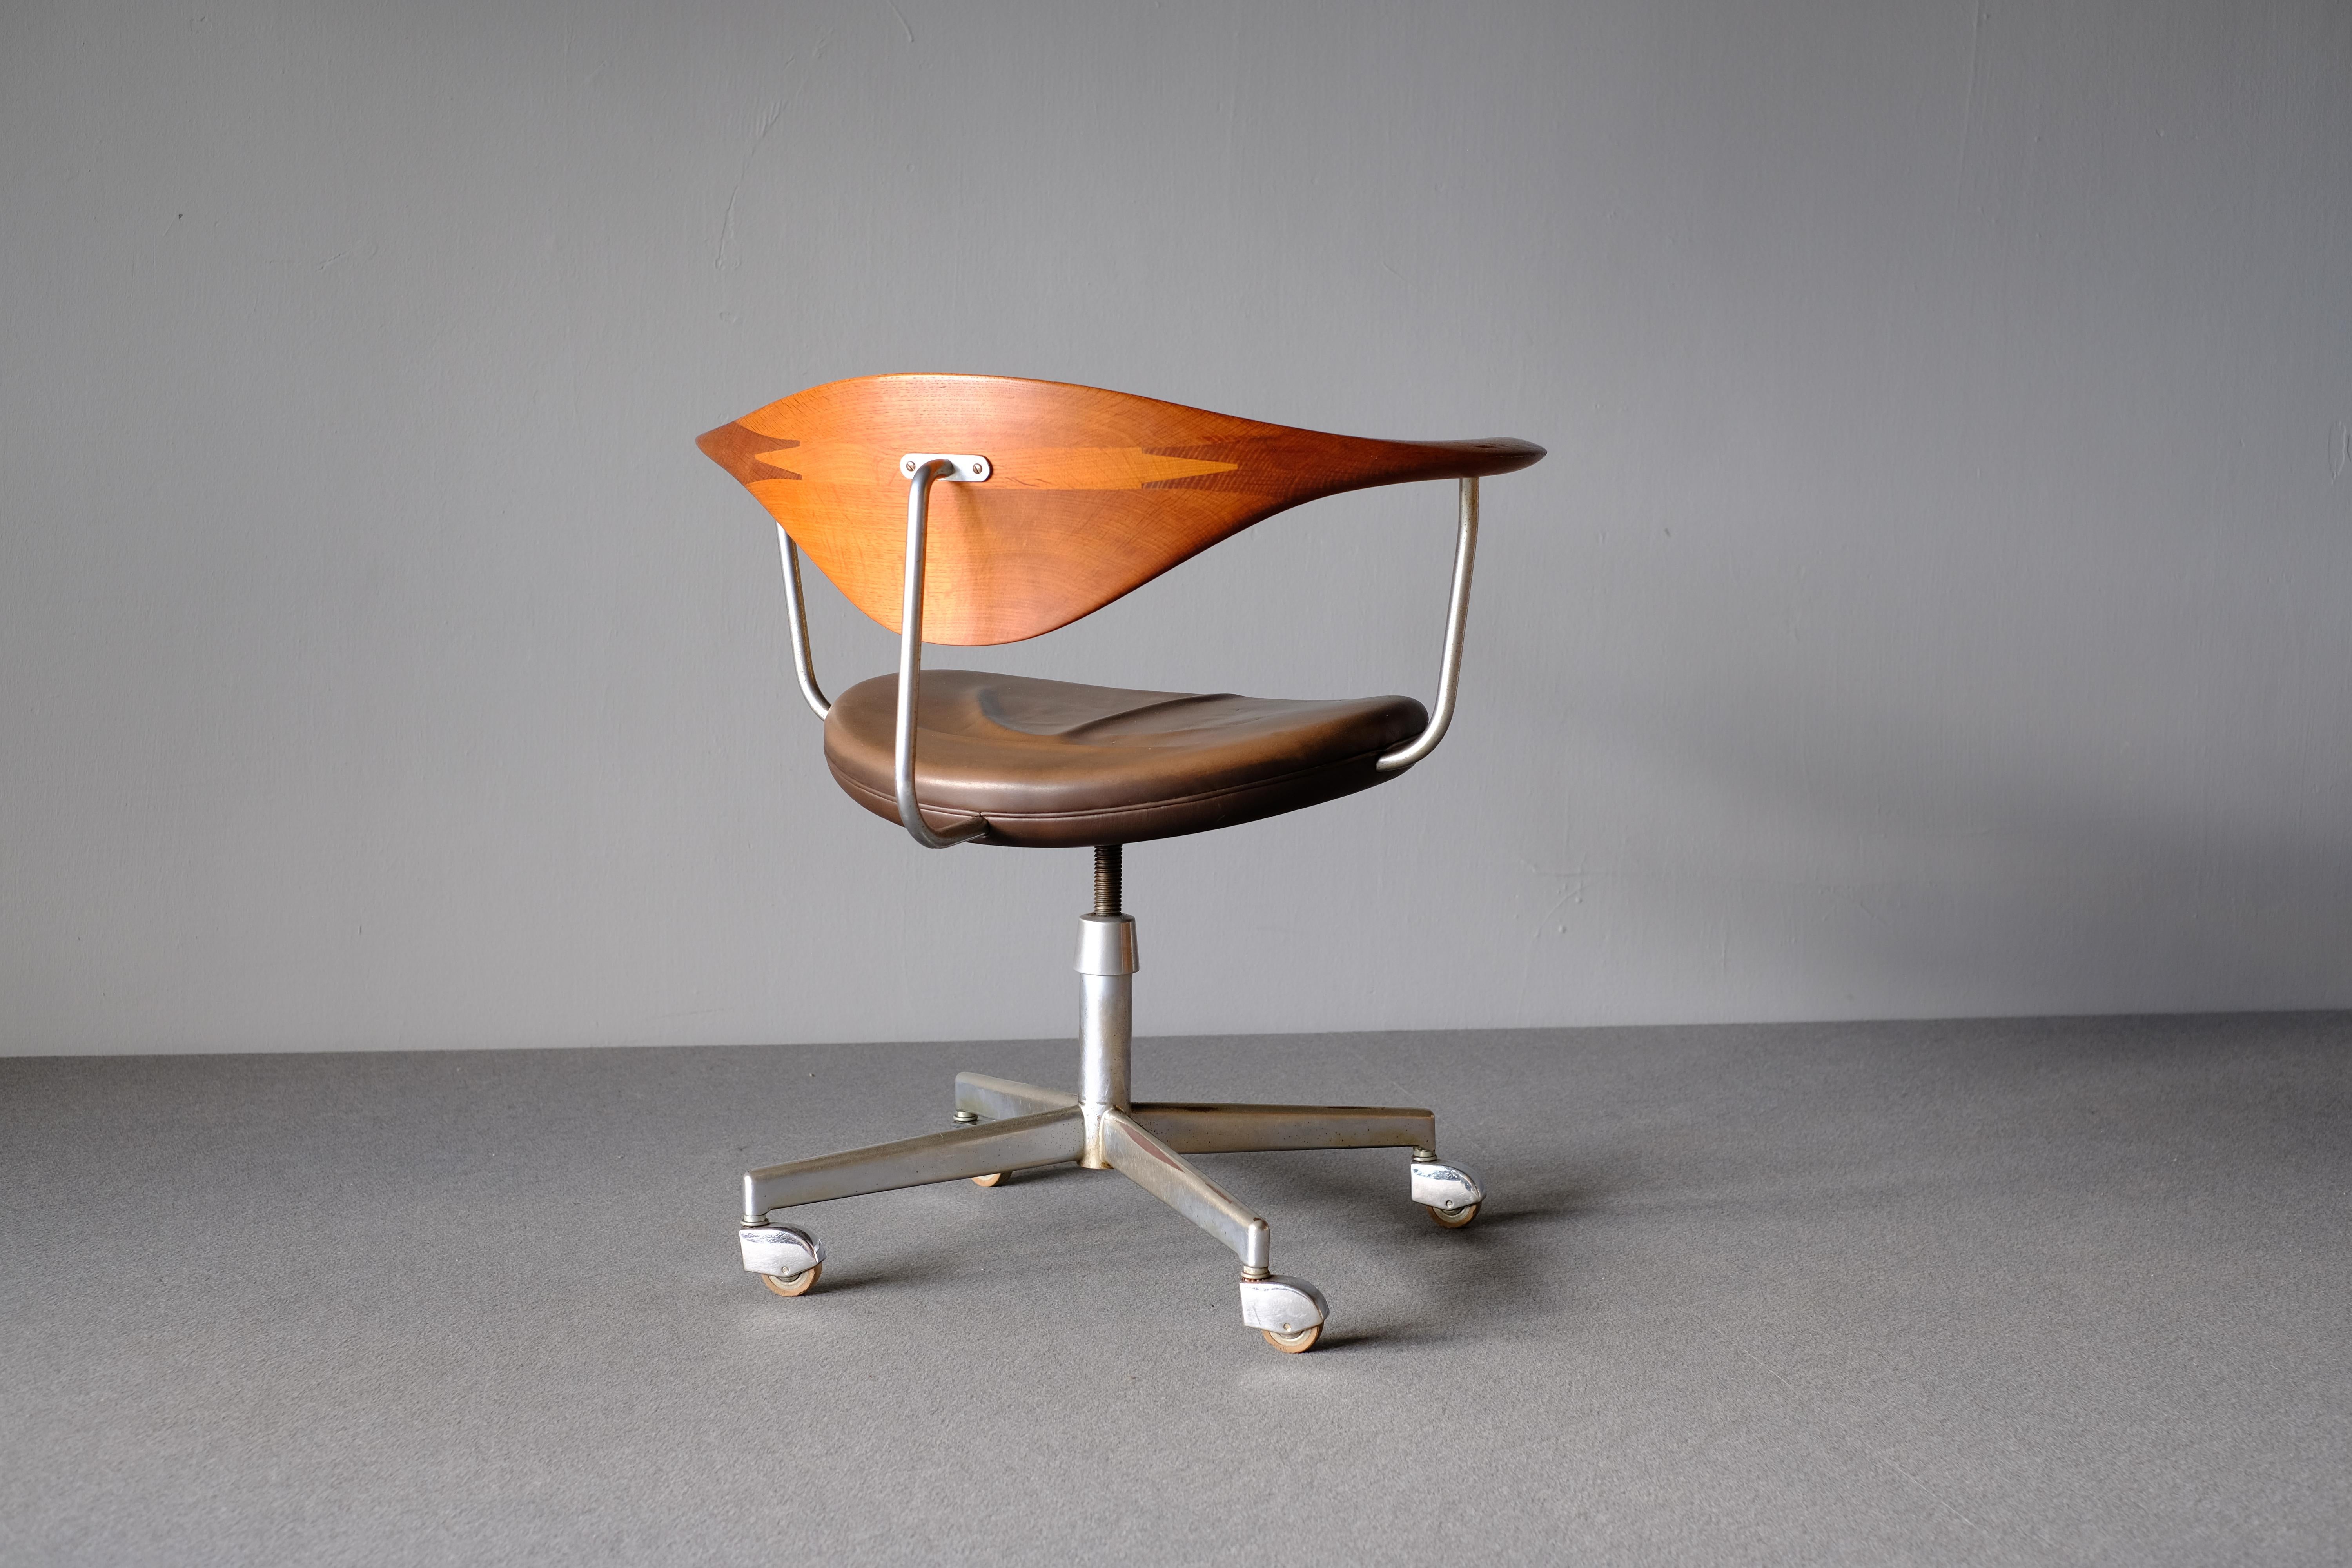 This amazing executive office chair model JH-502 was designed by Hans Wegner for master cabinetmaker Johannes Hansen. It was presented at the Copenhagen Cabinetmaker Guild Exhibition at Kunstindustrimuseet in 1955. This lovely example, circa 1960s